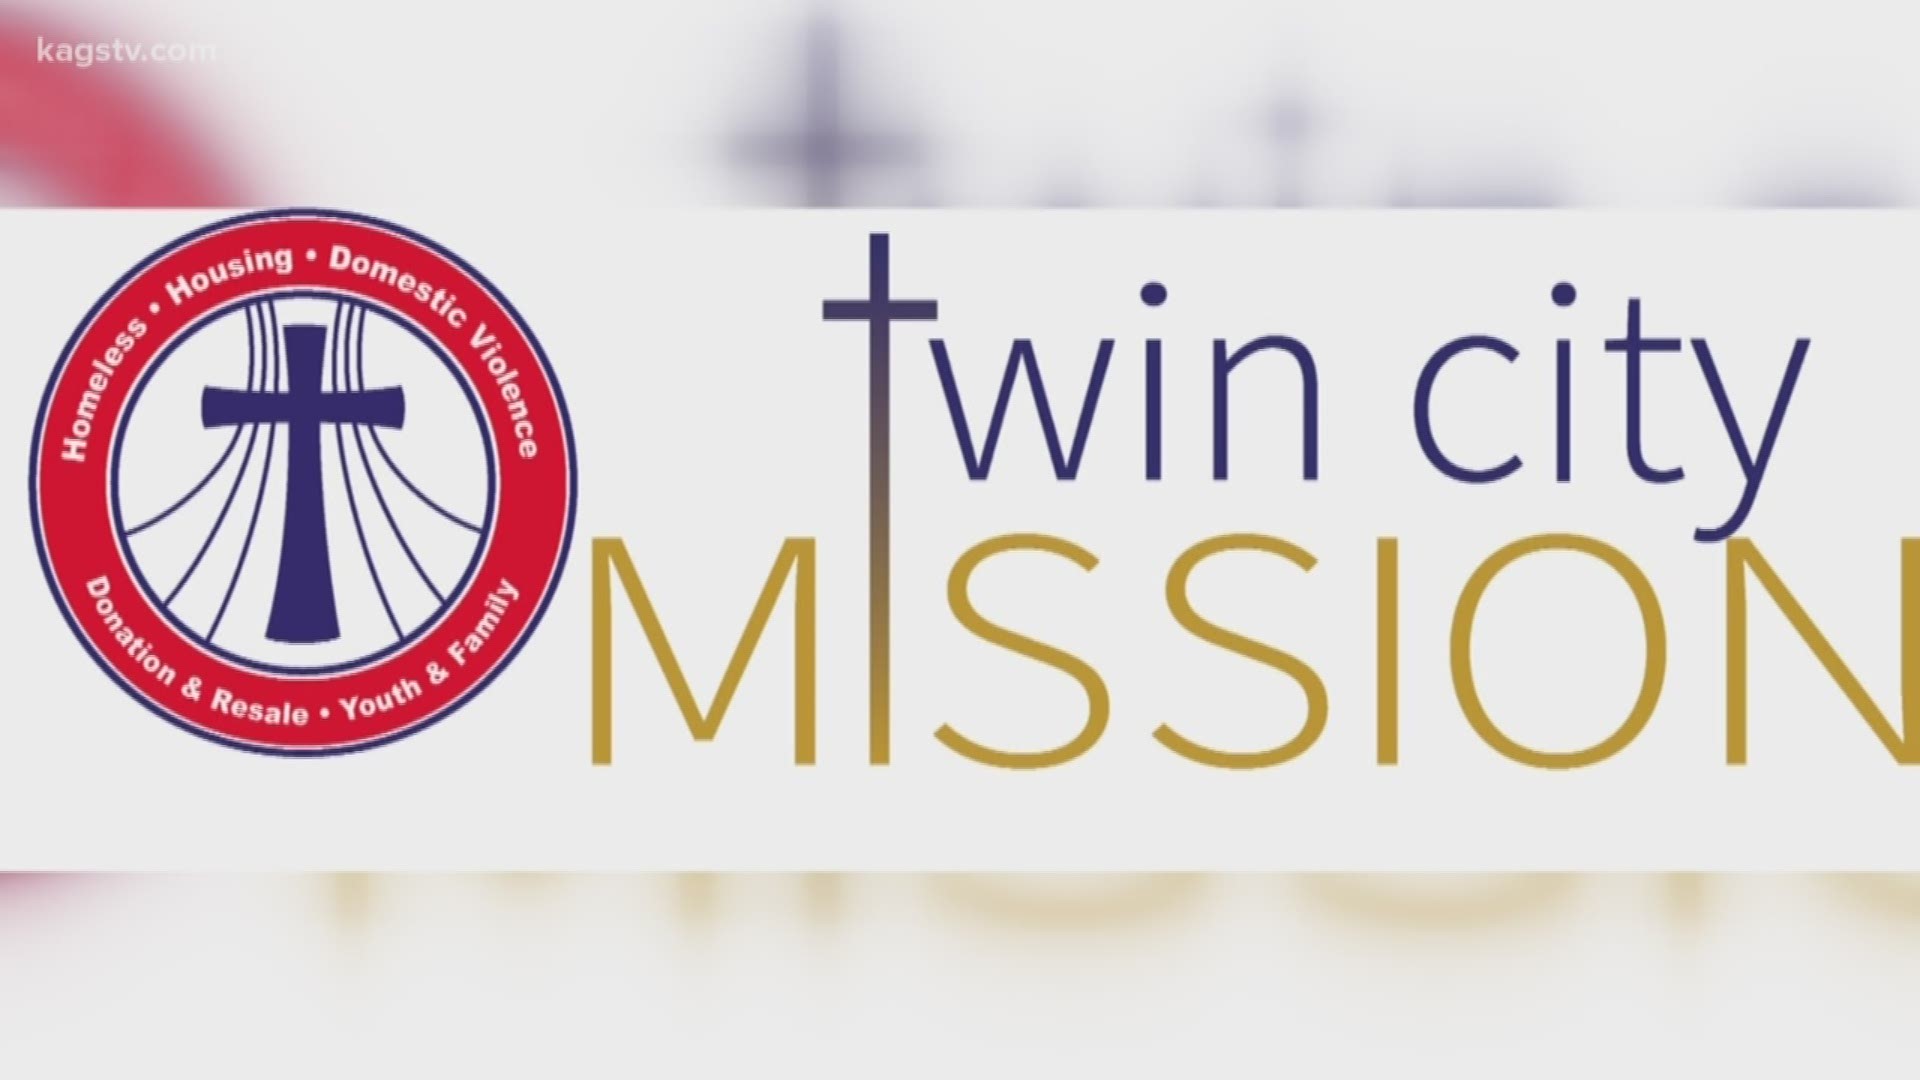 During these times of shelter in place, Twin City Mission is serving victims of domestic violence and homelessness a little differently.